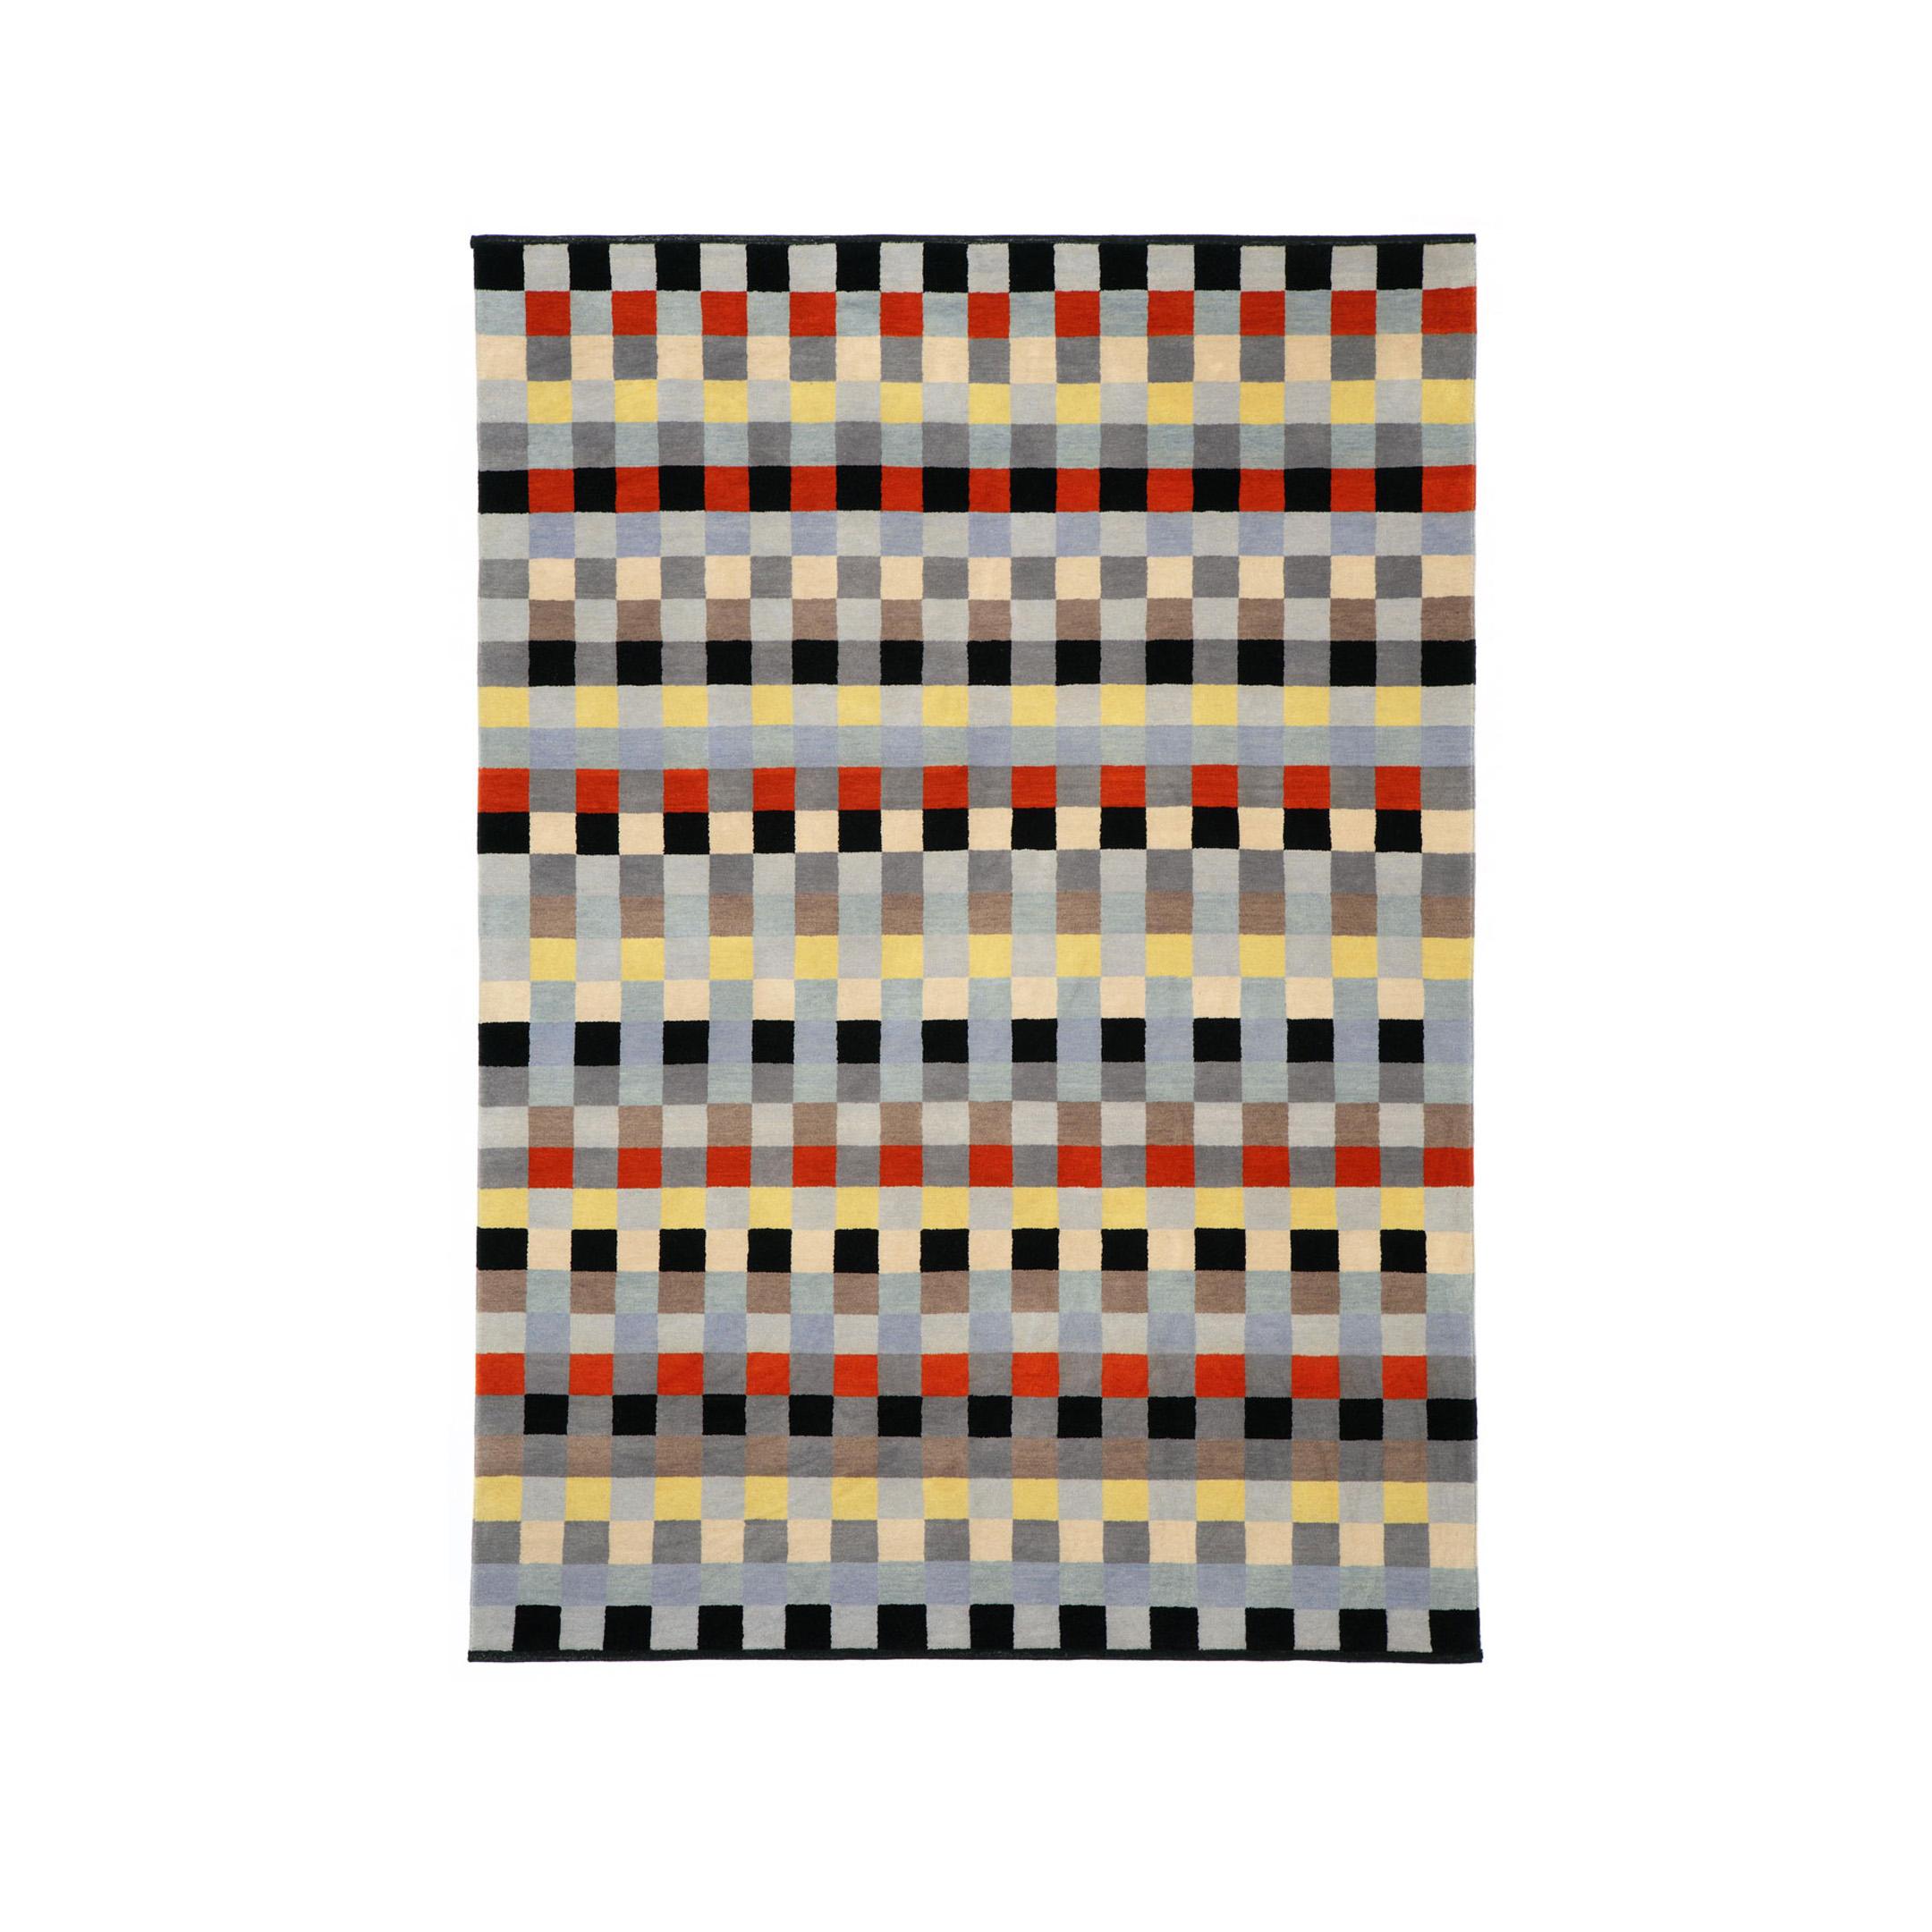 Small Child's Room Rug by Anni Albers In New Condition For Sale In Jersey City, NJ